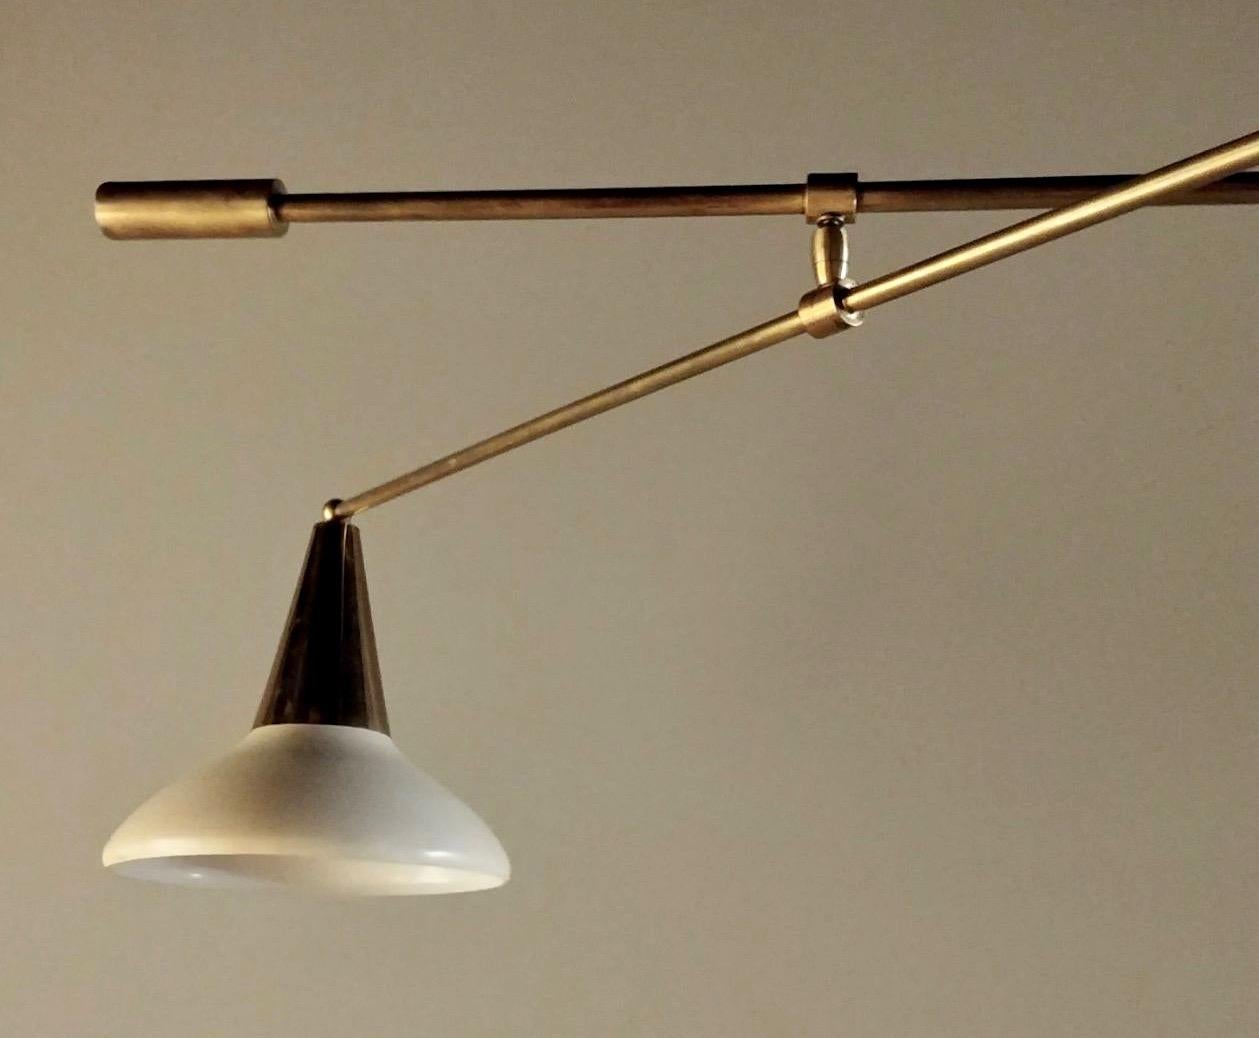 Midcentury Italian Brass and Lacquered Metal Chandelier with Two Articulate Arms 1